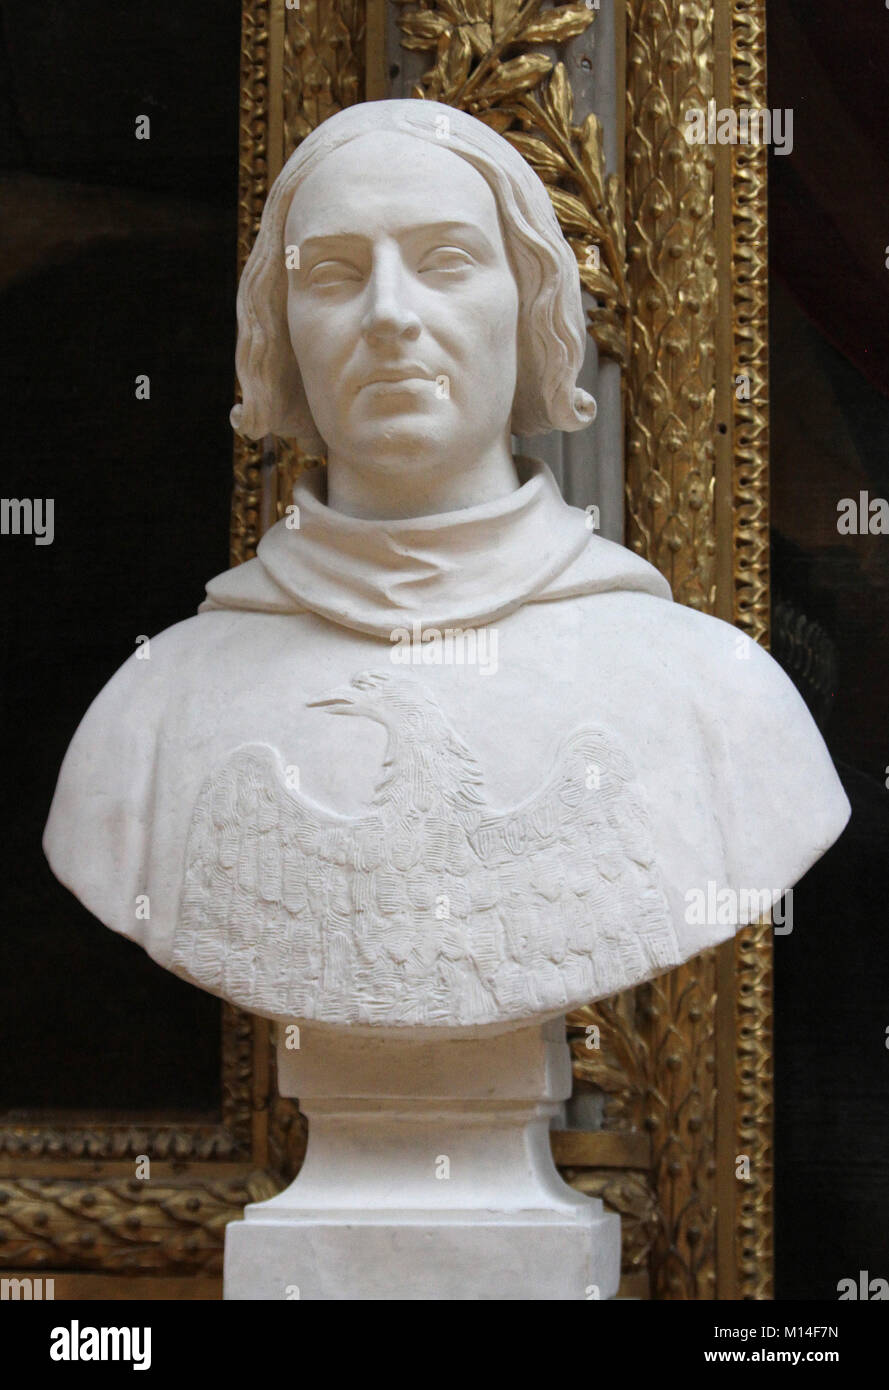 Marble bust of French Admiral Jean de Vienne by Francisque Duret in the Gallery of Battles, Versailles Palace, Ile-De-France, France. Stock Photo